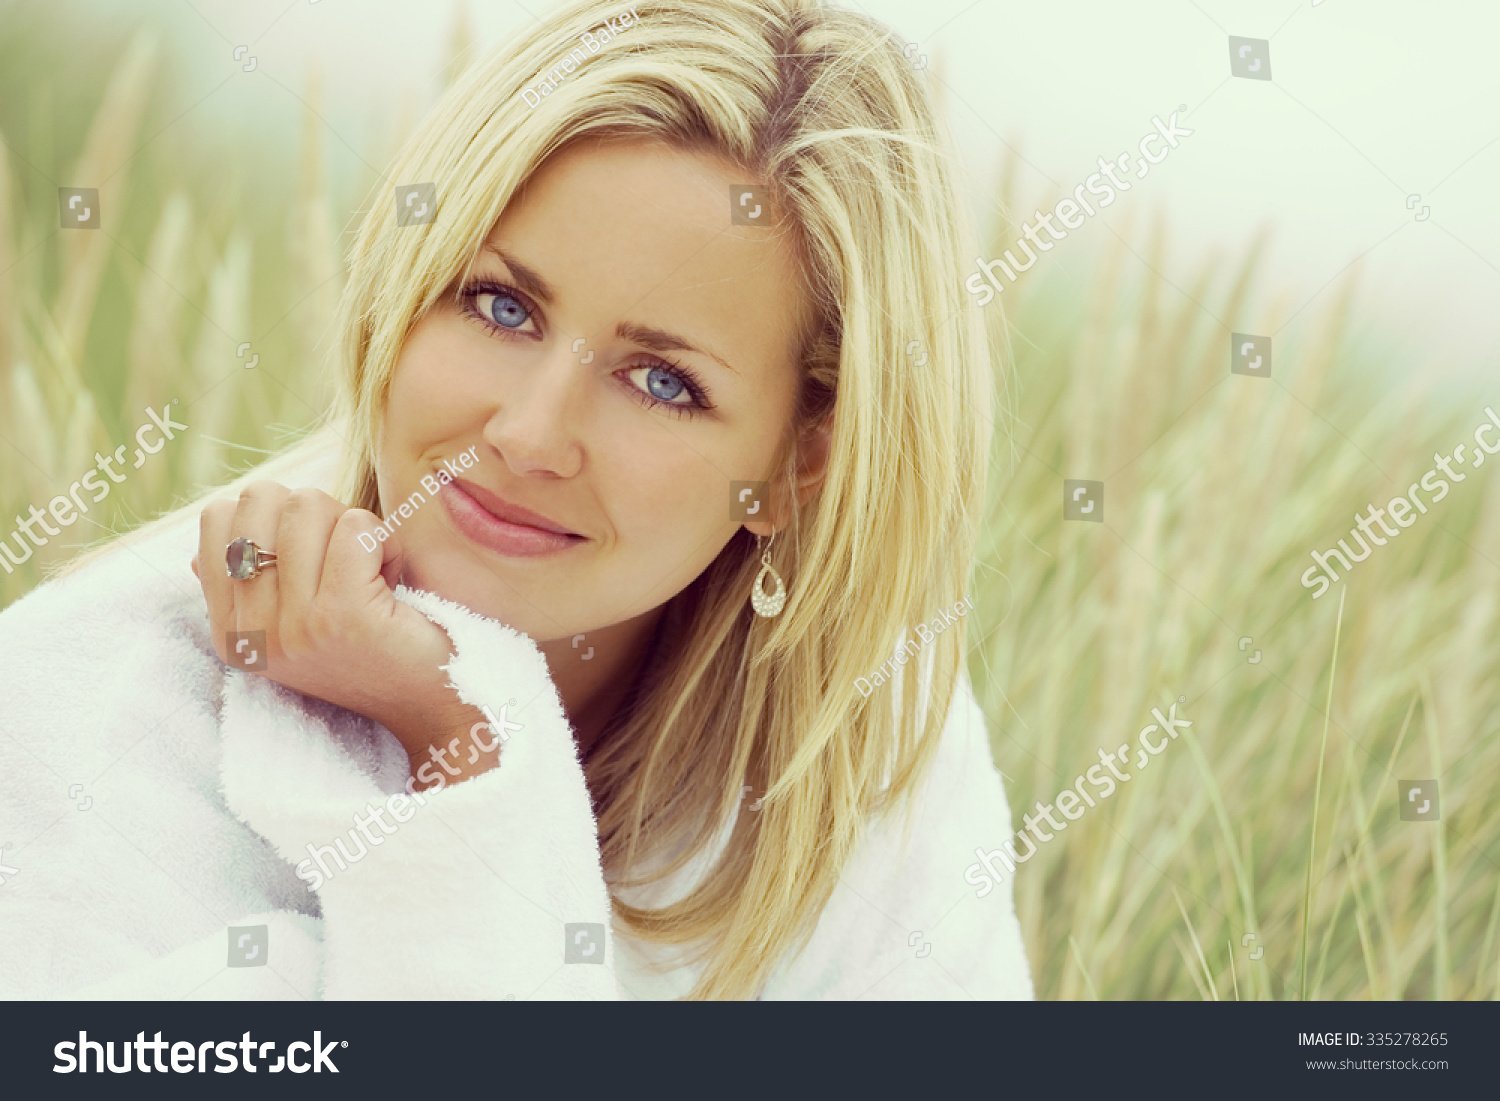 Instagram Filter Style Photograph Beautiful Blond Stock Photo